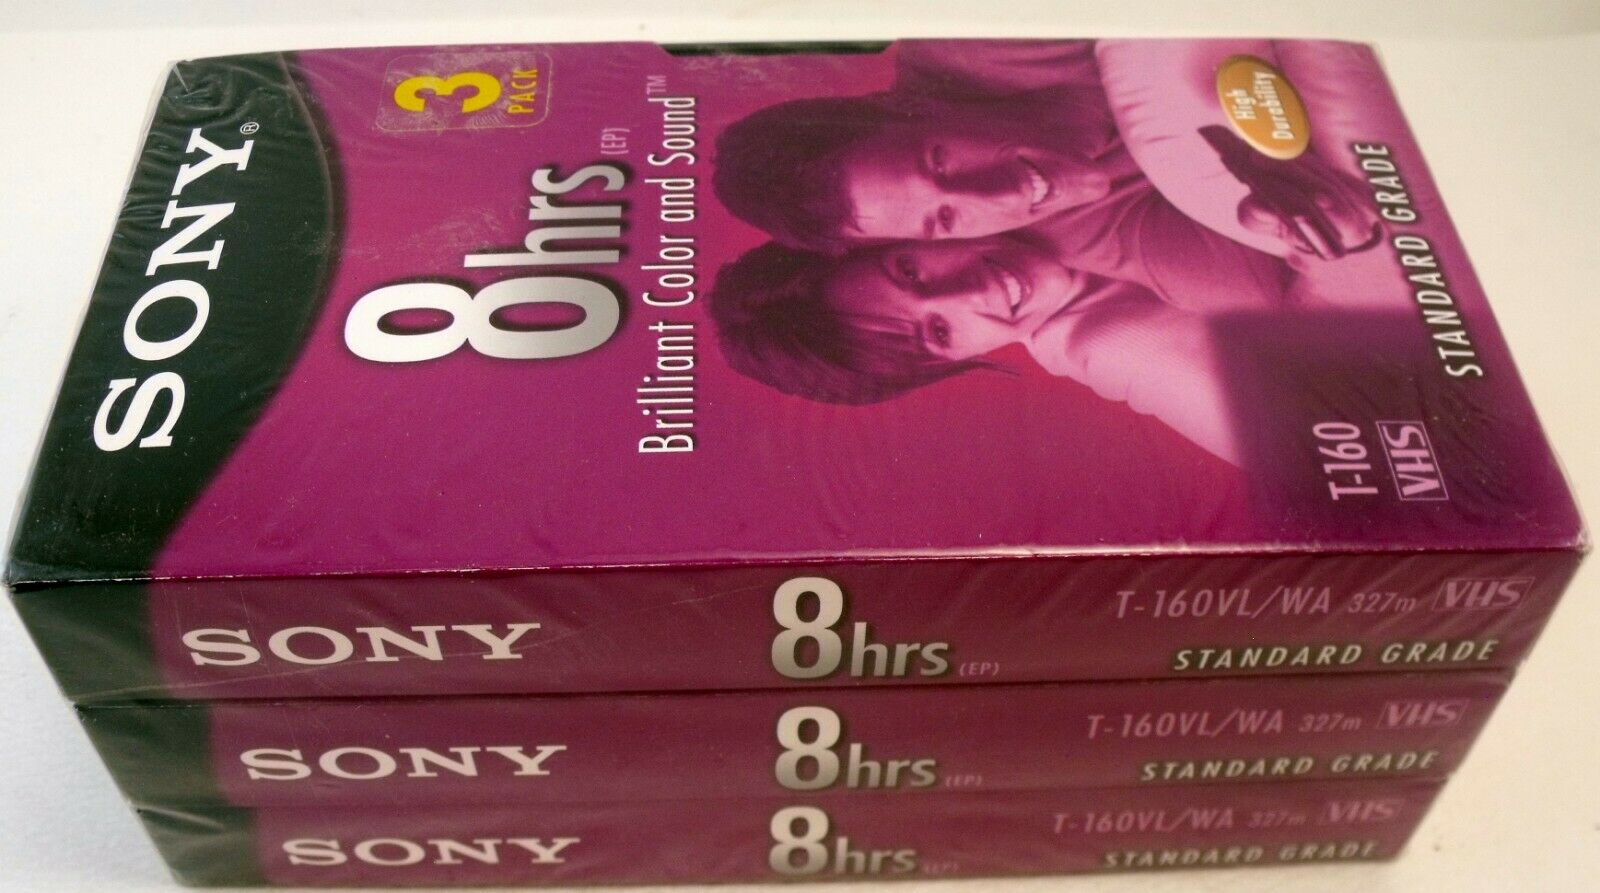 3 Pack Sony T-160vl/wa Vhs Blank Video Tapes 8 Hour Brand New Sealed Nos